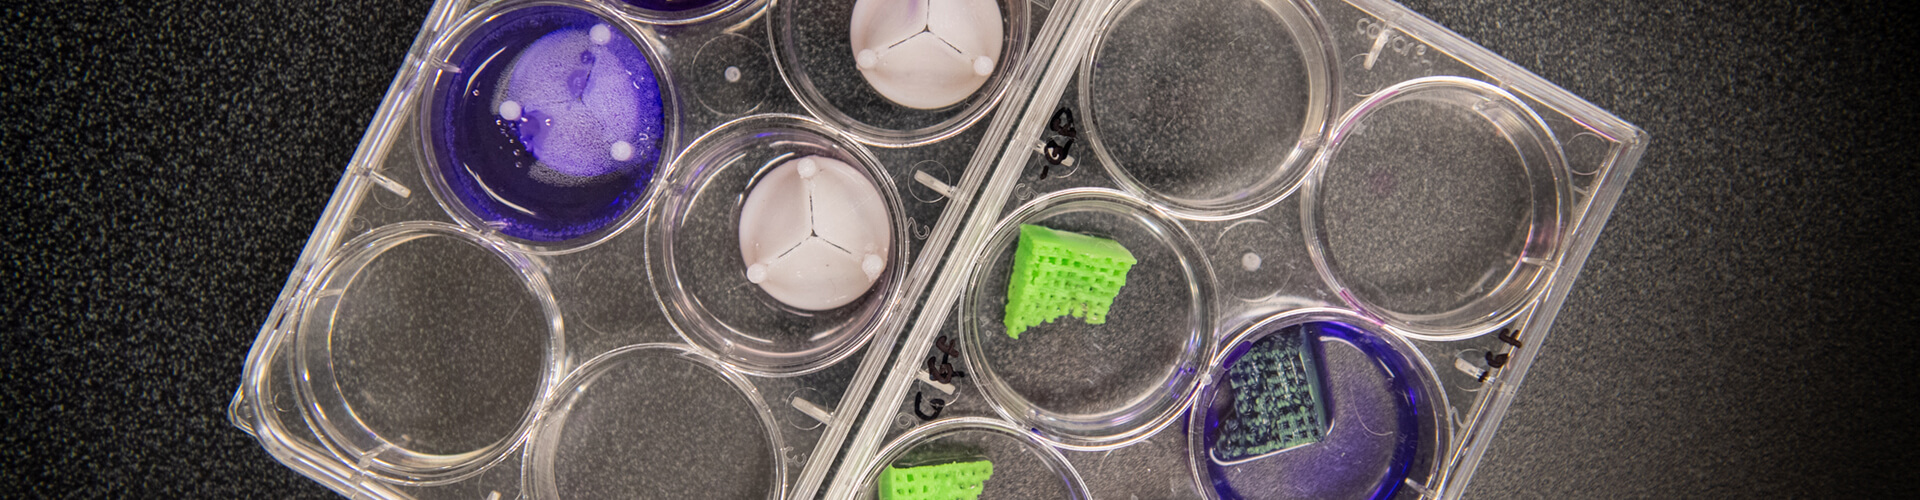 bioscaffolds used in the experiment